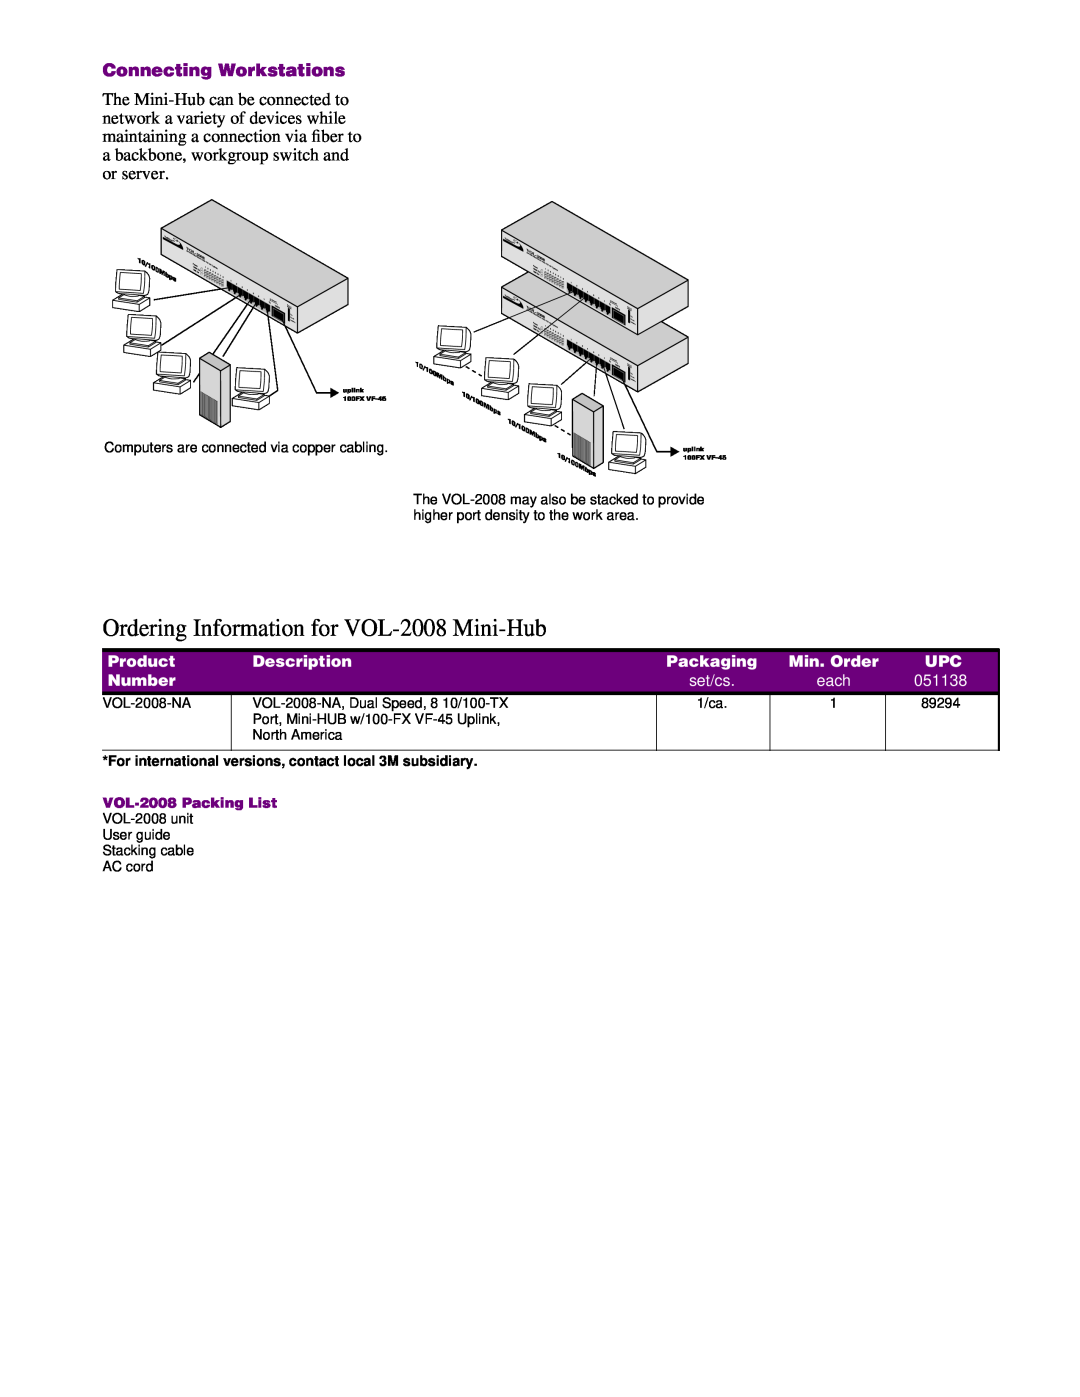 IBM Ordering Information for VOL-2008 Mini-Hub, Connecting Workstations, Product, Description, Packaging, Min. Order 